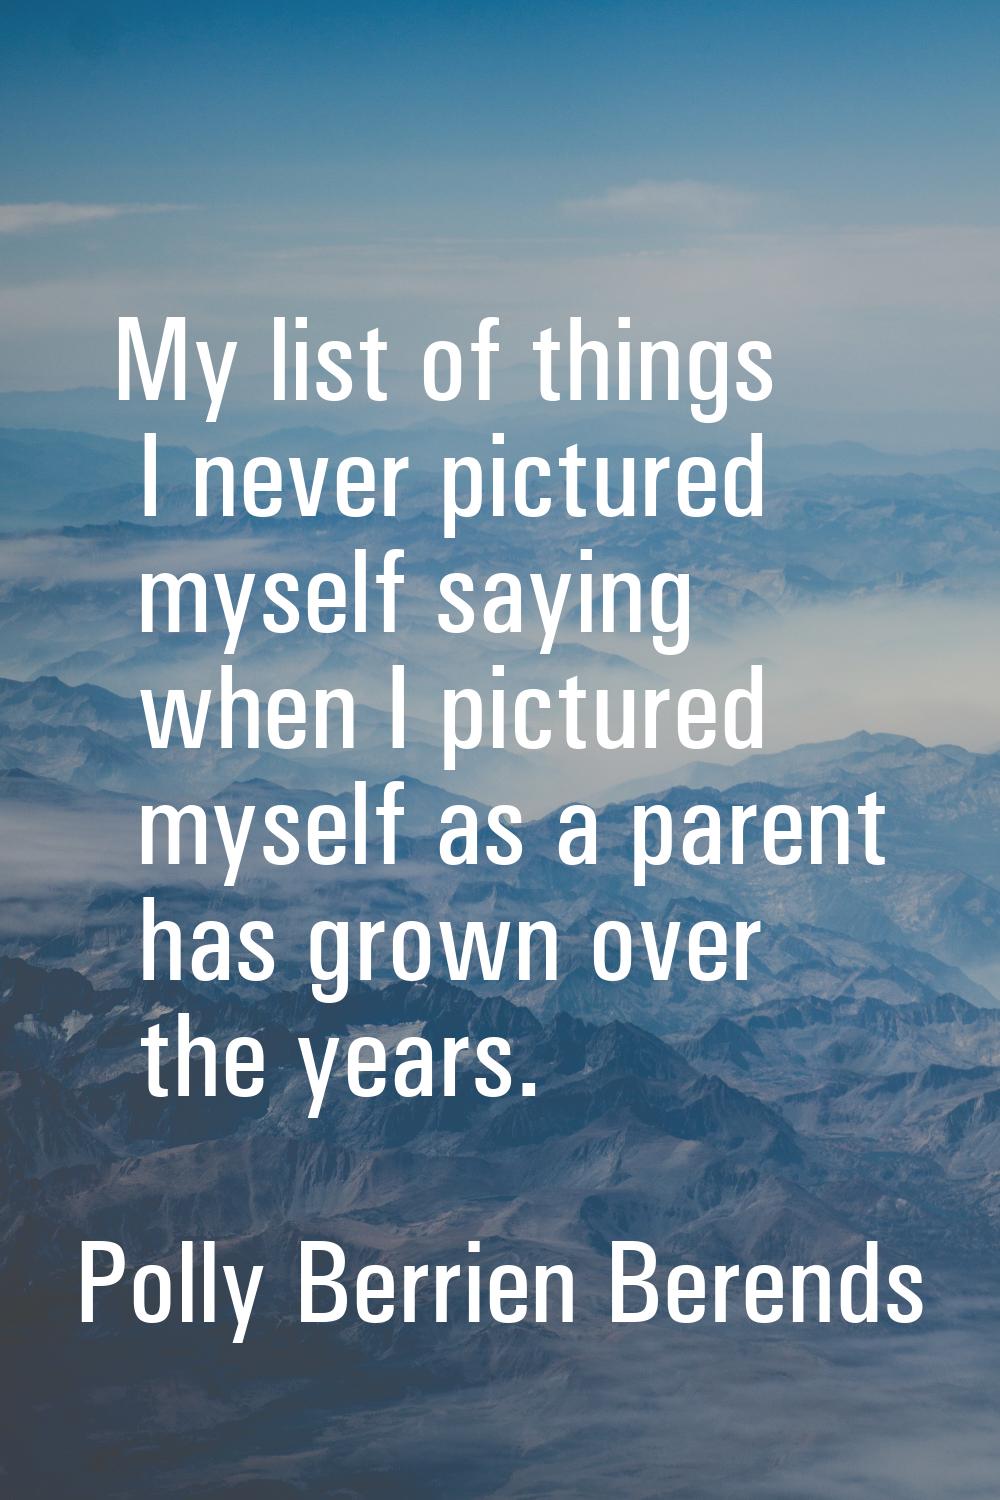 My list of things I never pictured myself saying when I pictured myself as a parent has grown over 